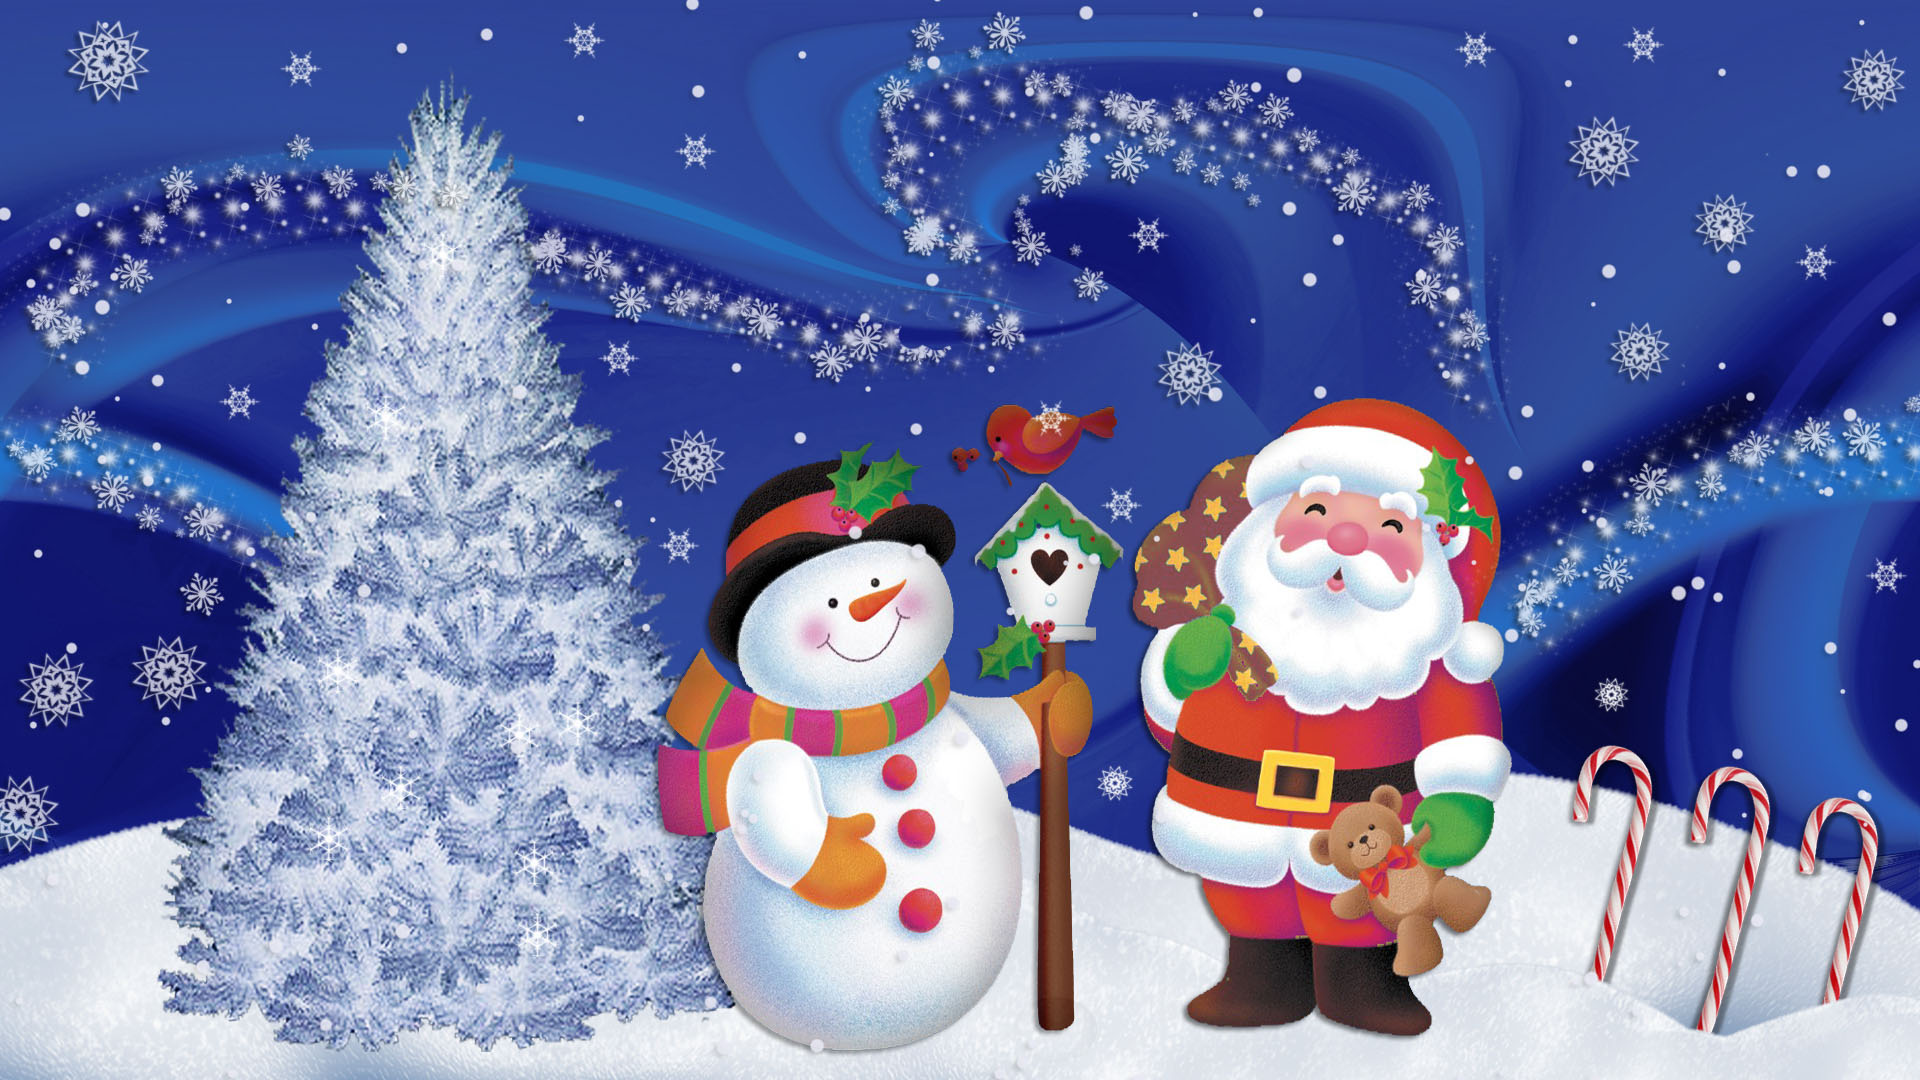 cute santa claus wallpaper images & pictures becuo